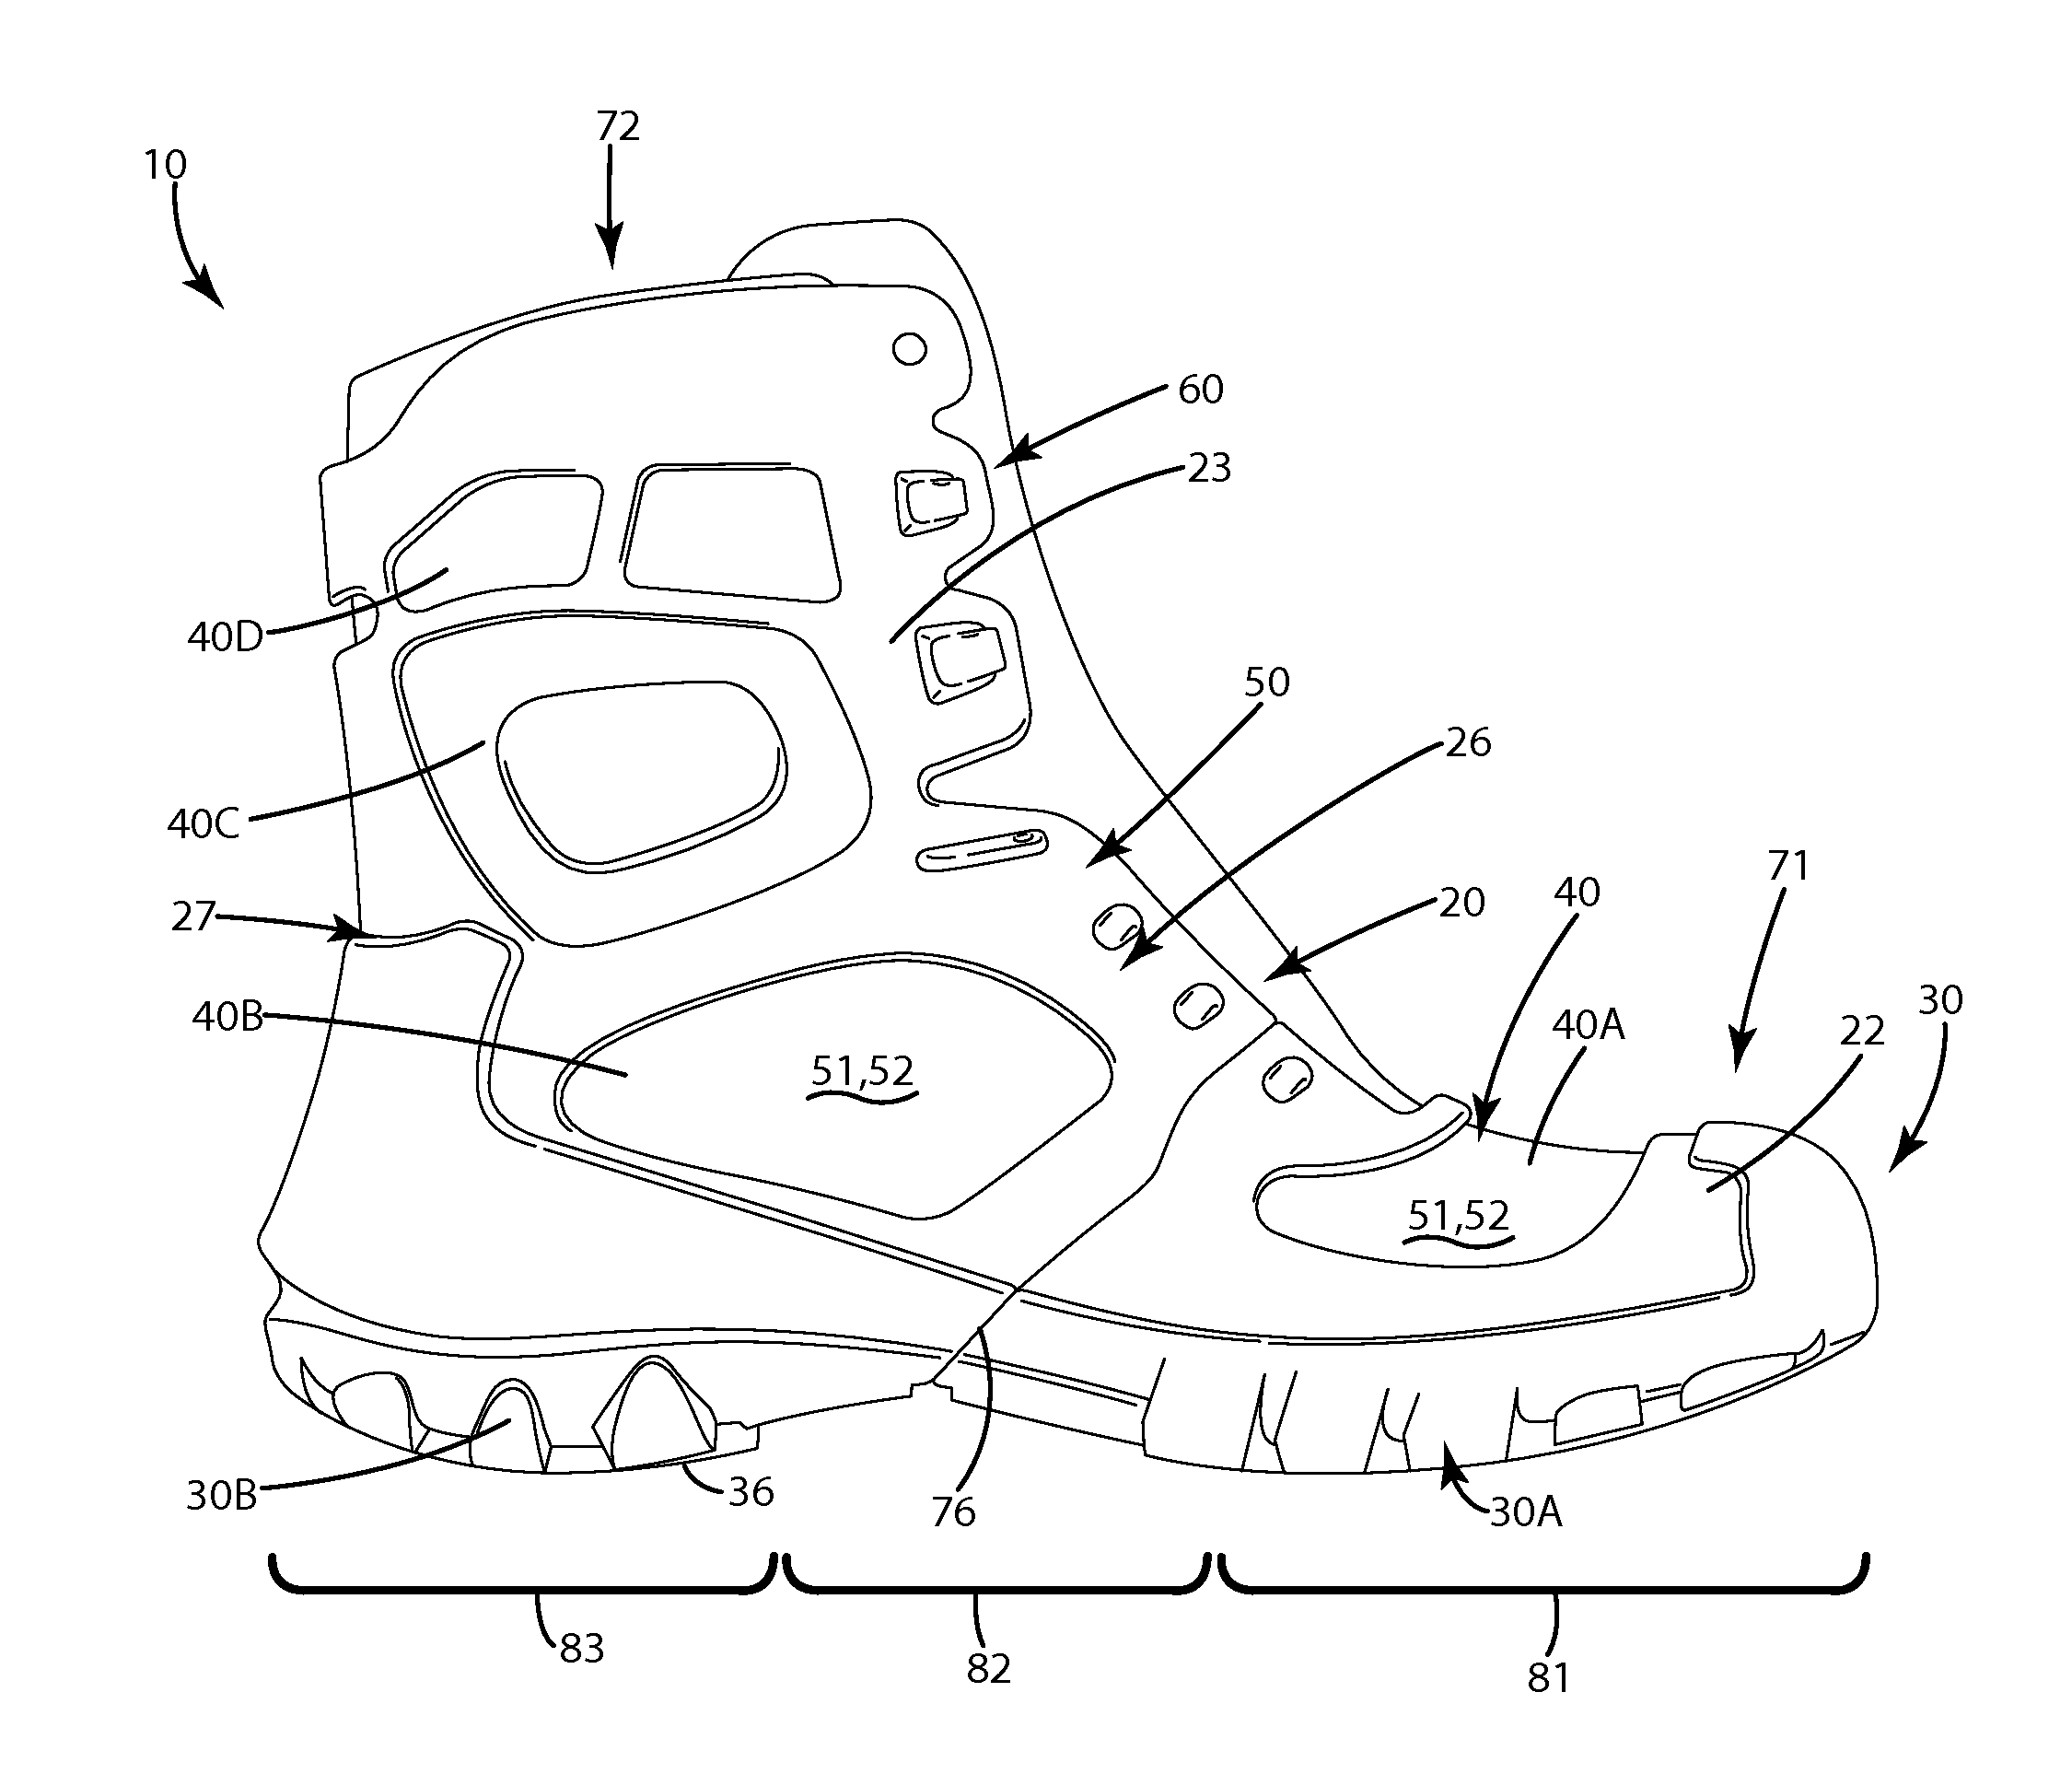 Injection molded footwear and related method of manufacture